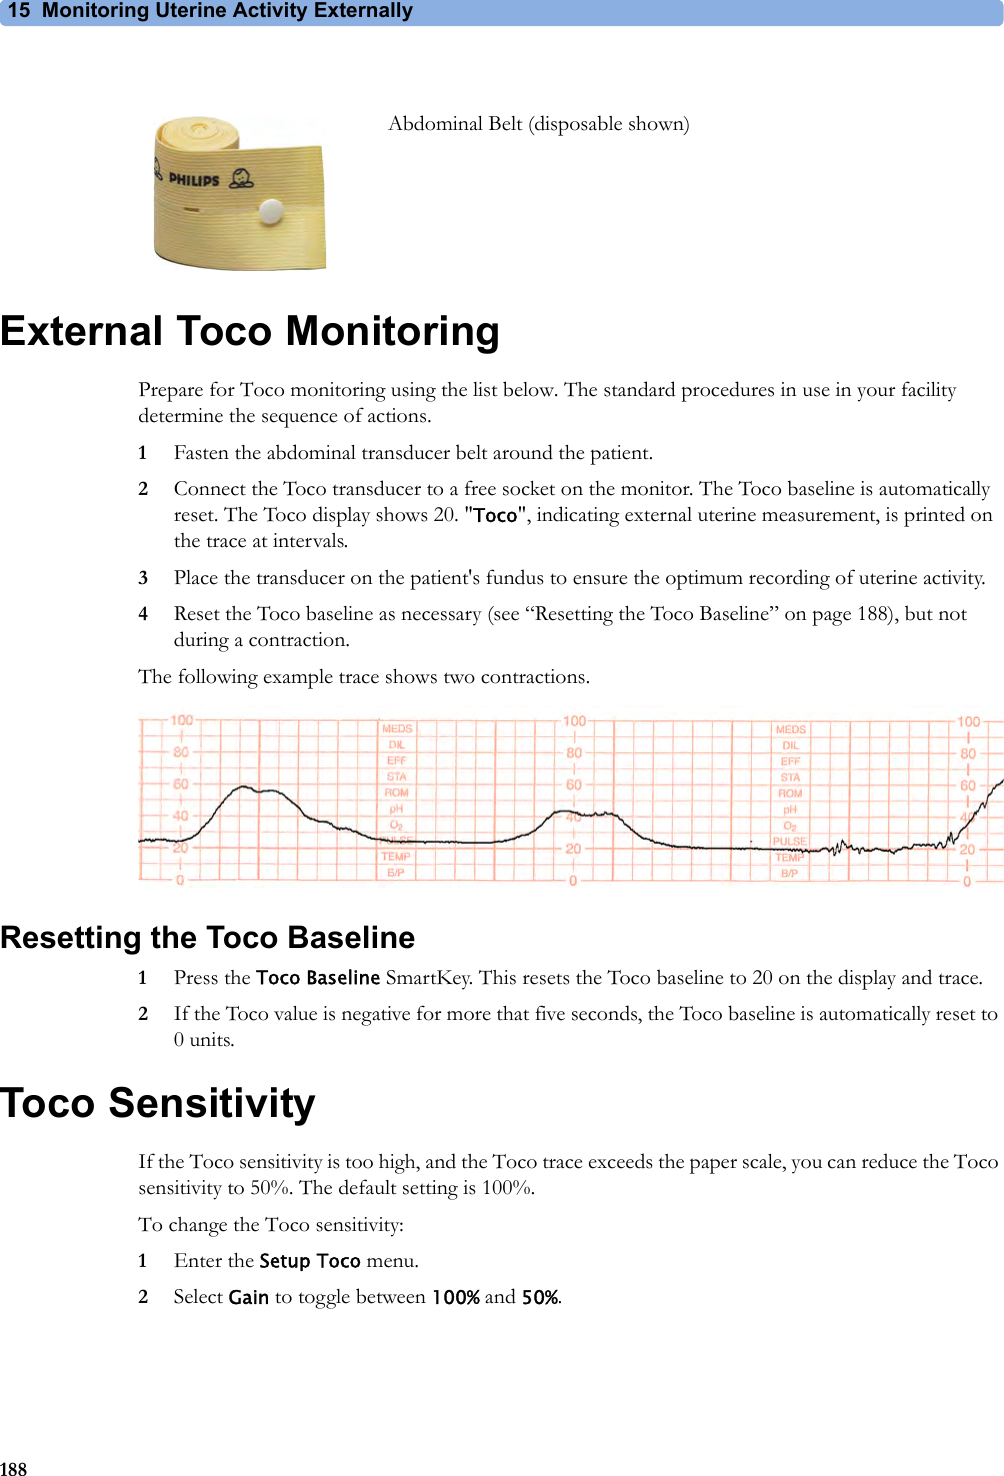 15 Monitoring Uterine Activity Externally188External Toco MonitoringPrepare for Toco monitoring using the list below. The standard procedures in use in your facility determine the sequence of actions.1Fasten the abdominal transducer belt around the patient.2Connect the Toco transducer to a free socket on the monitor. The Toco baseline is automatically reset. The Toco display shows 20. &quot;Toco&quot;, indicating external uterine measurement, is printed on the trace at intervals.3Place the transducer on the patient&apos;s fundus to ensure the optimum recording of uterine activity.4Reset the Toco baseline as necessary (see “Resetting the Toco Baseline” on page 188), but not during a contraction.The following example trace shows two contractions.Resetting the Toco Baseline1Press the Toco Baseline SmartKey. This resets the Toco baseline to 20 on the display and trace.2If the Toco value is negative for more that five seconds, the Toco baseline is automatically reset to 0 units.Toco SensitivityIf the Toco sensitivity is too high, and the Toco trace exceeds the paper scale, you can reduce the Toco sensitivity to 50%. The default setting is 100%.To change the Toco sensitivity:1Enter the Setup Toco menu.2Select Gain to toggle between 100% and 50%.Abdominal Belt (disposable shown)